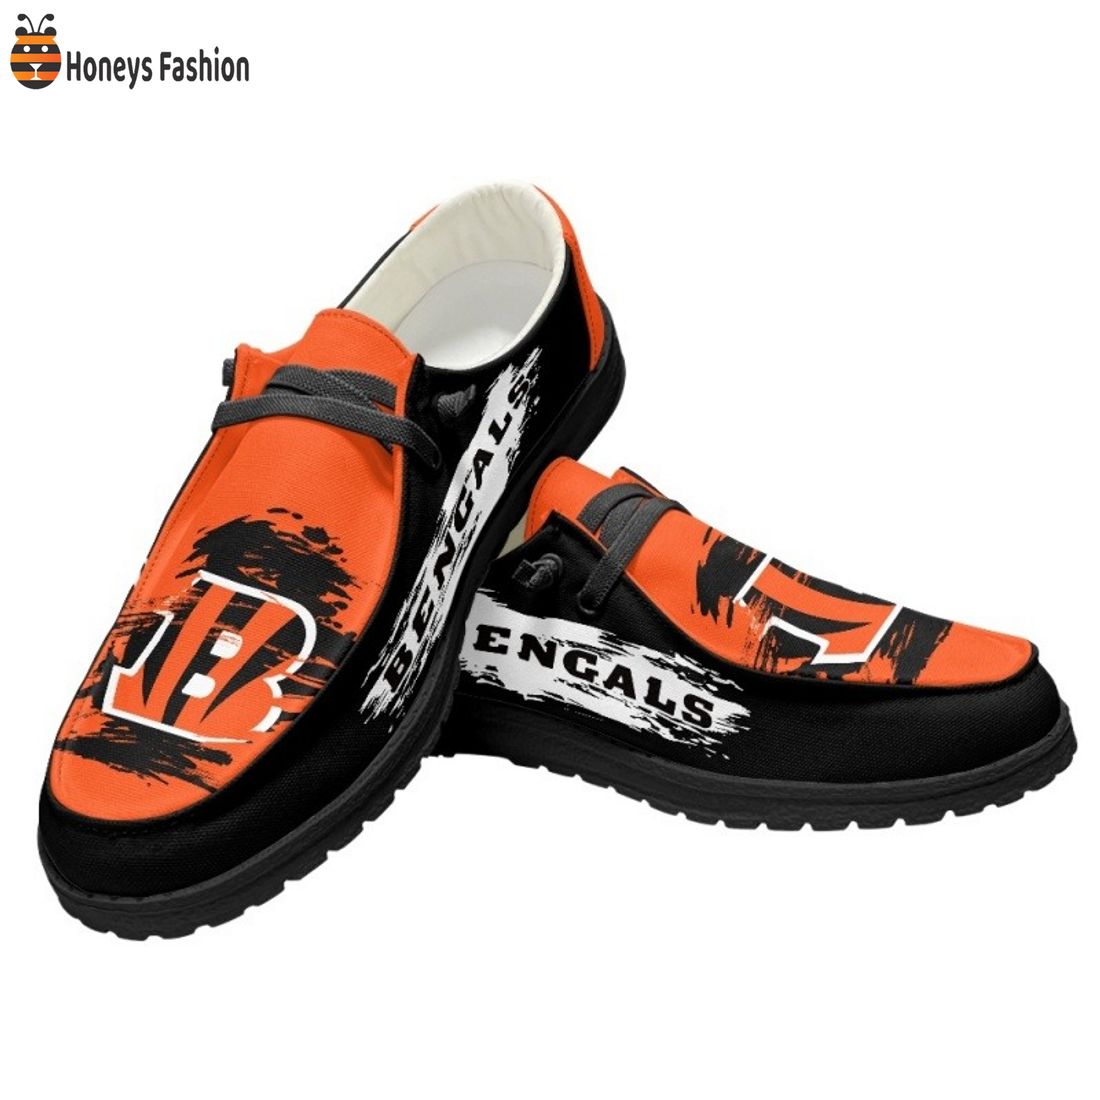 AMAZING NFL Cincinnati Bengals Lace Up Loafers Hey Dude Shoes